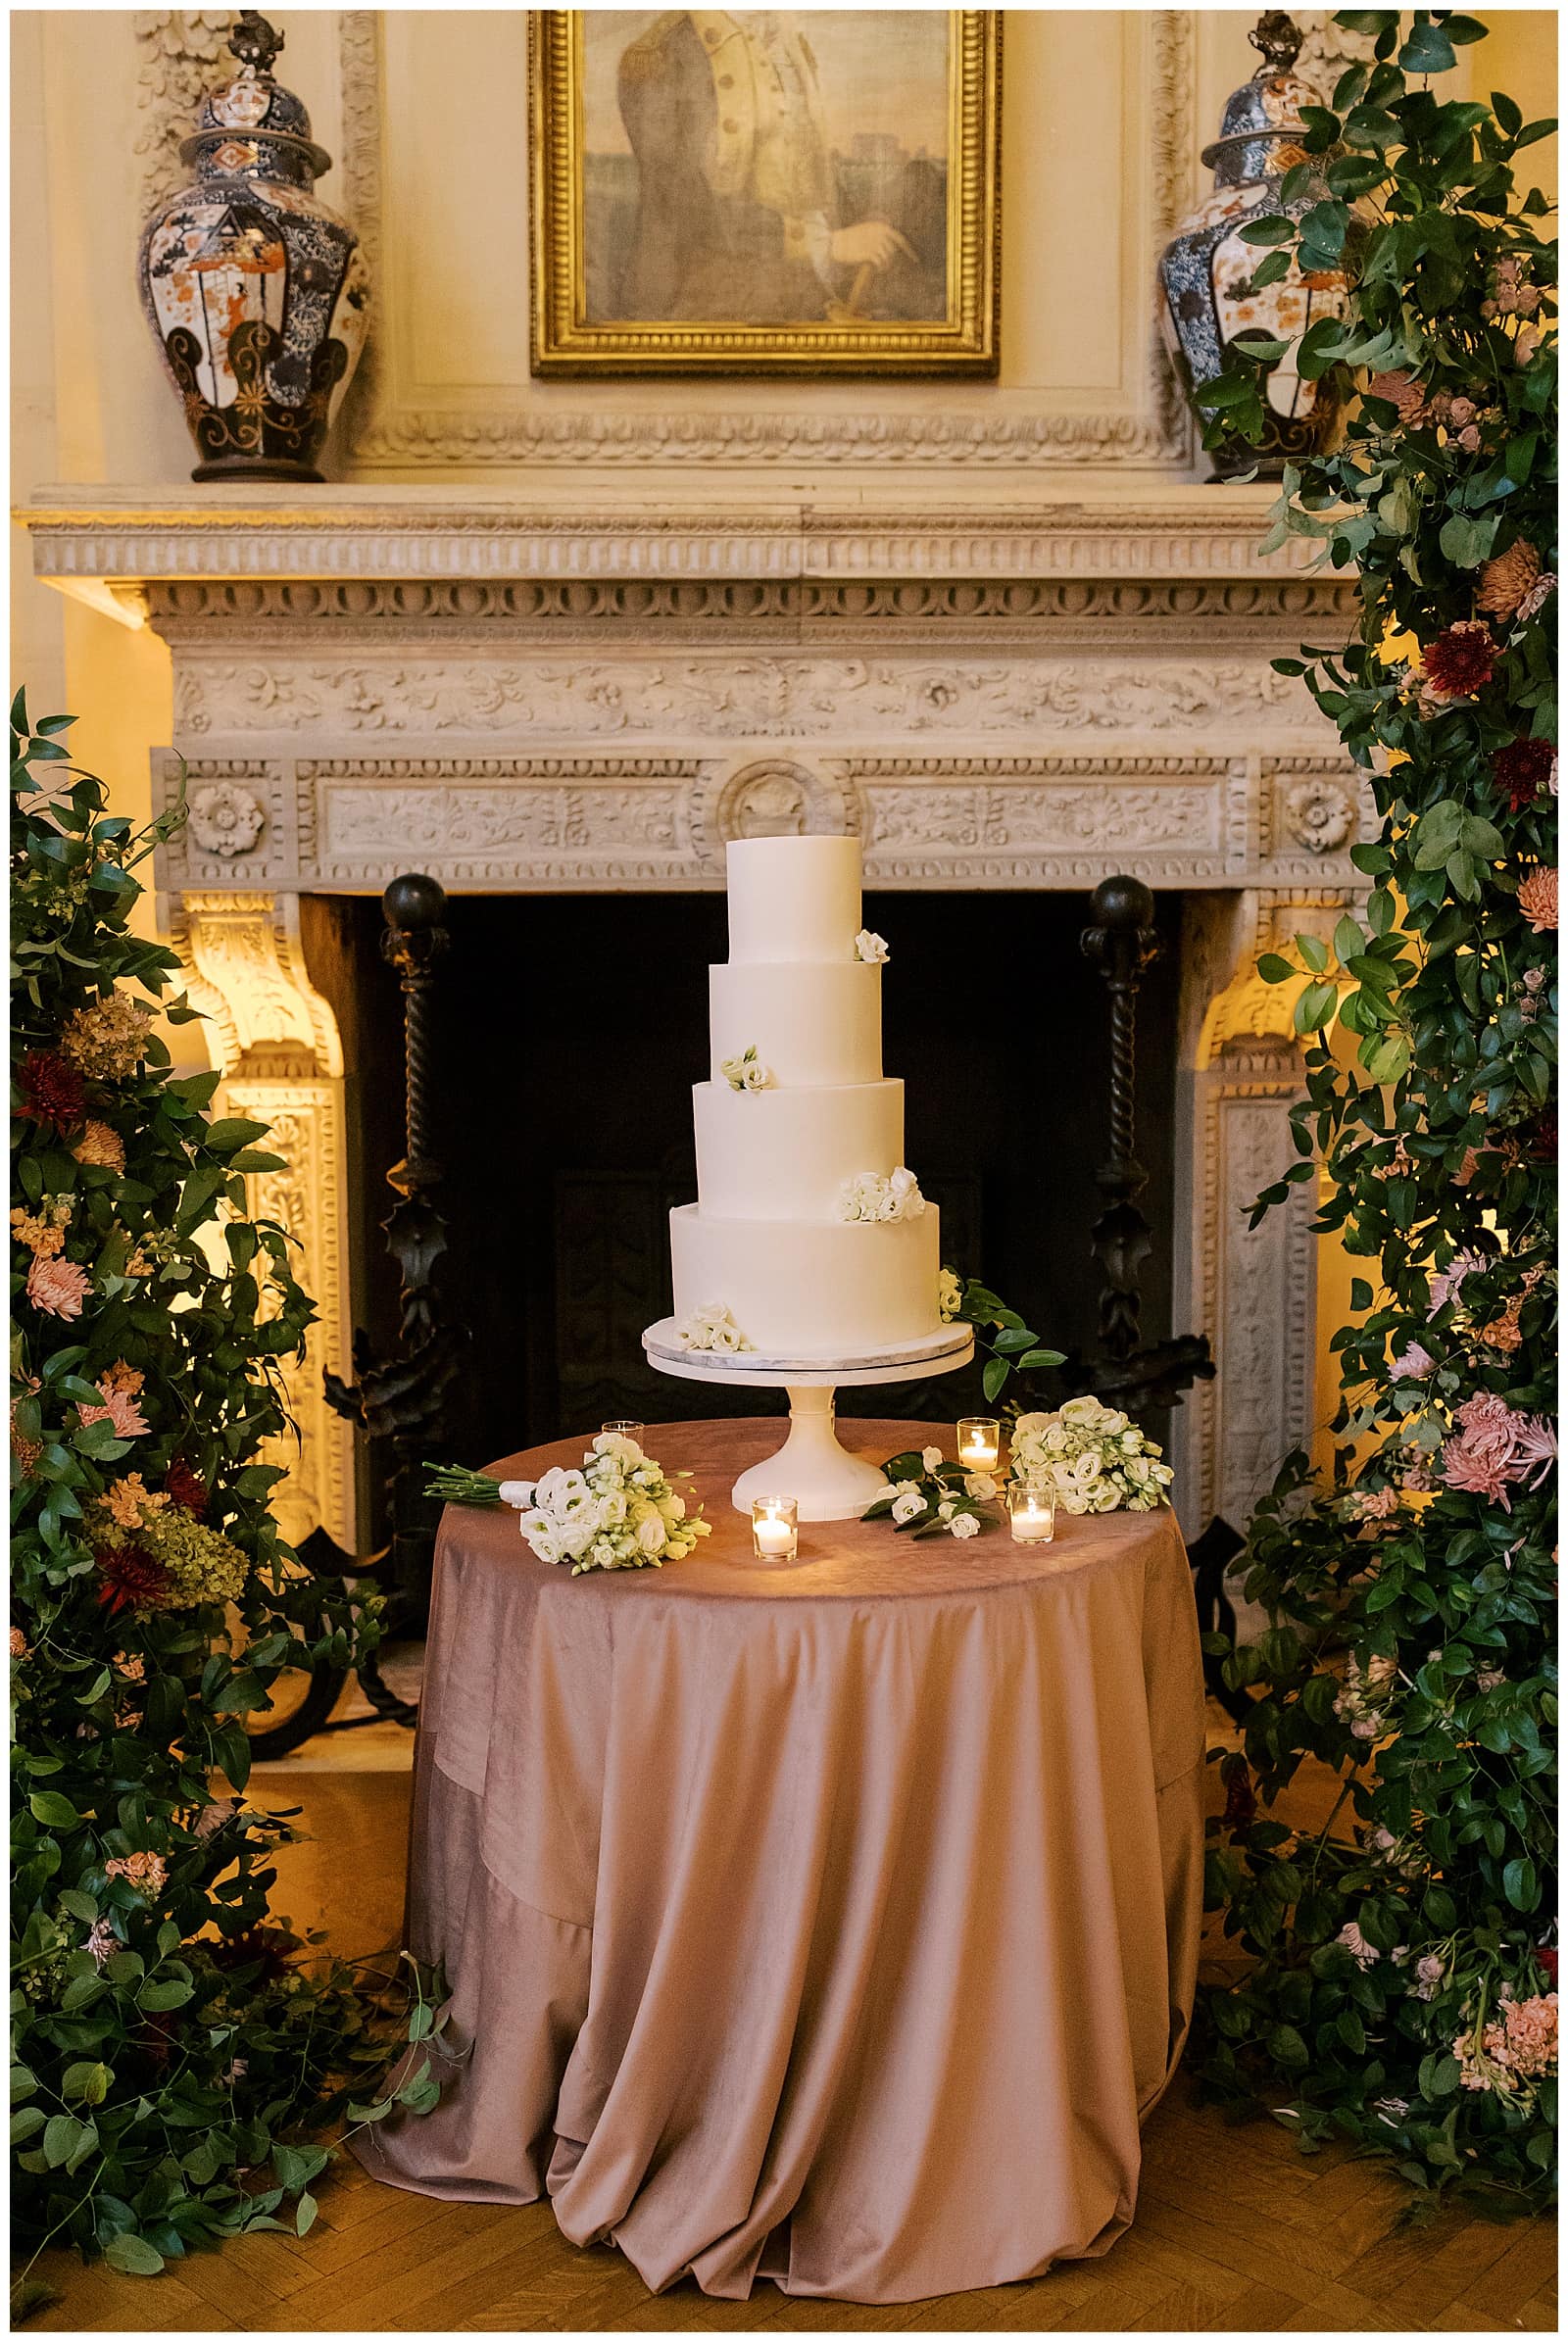 Image of a four tier white wedding cake on a table with velvet tablecloth in between two large floral arrangements in front of the fire place at the Anderson House